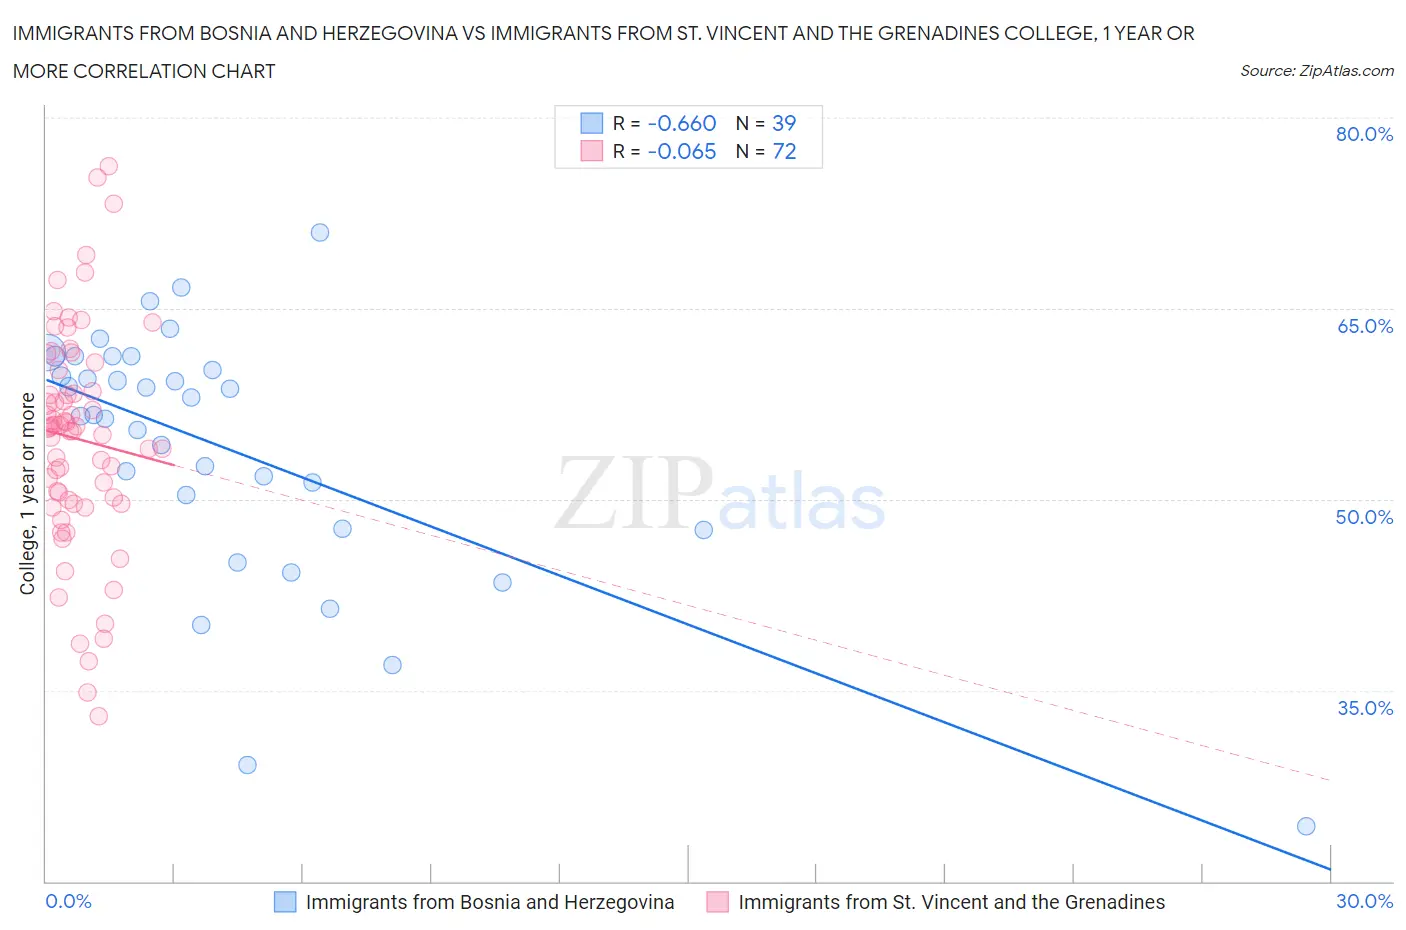 Immigrants from Bosnia and Herzegovina vs Immigrants from St. Vincent and the Grenadines College, 1 year or more